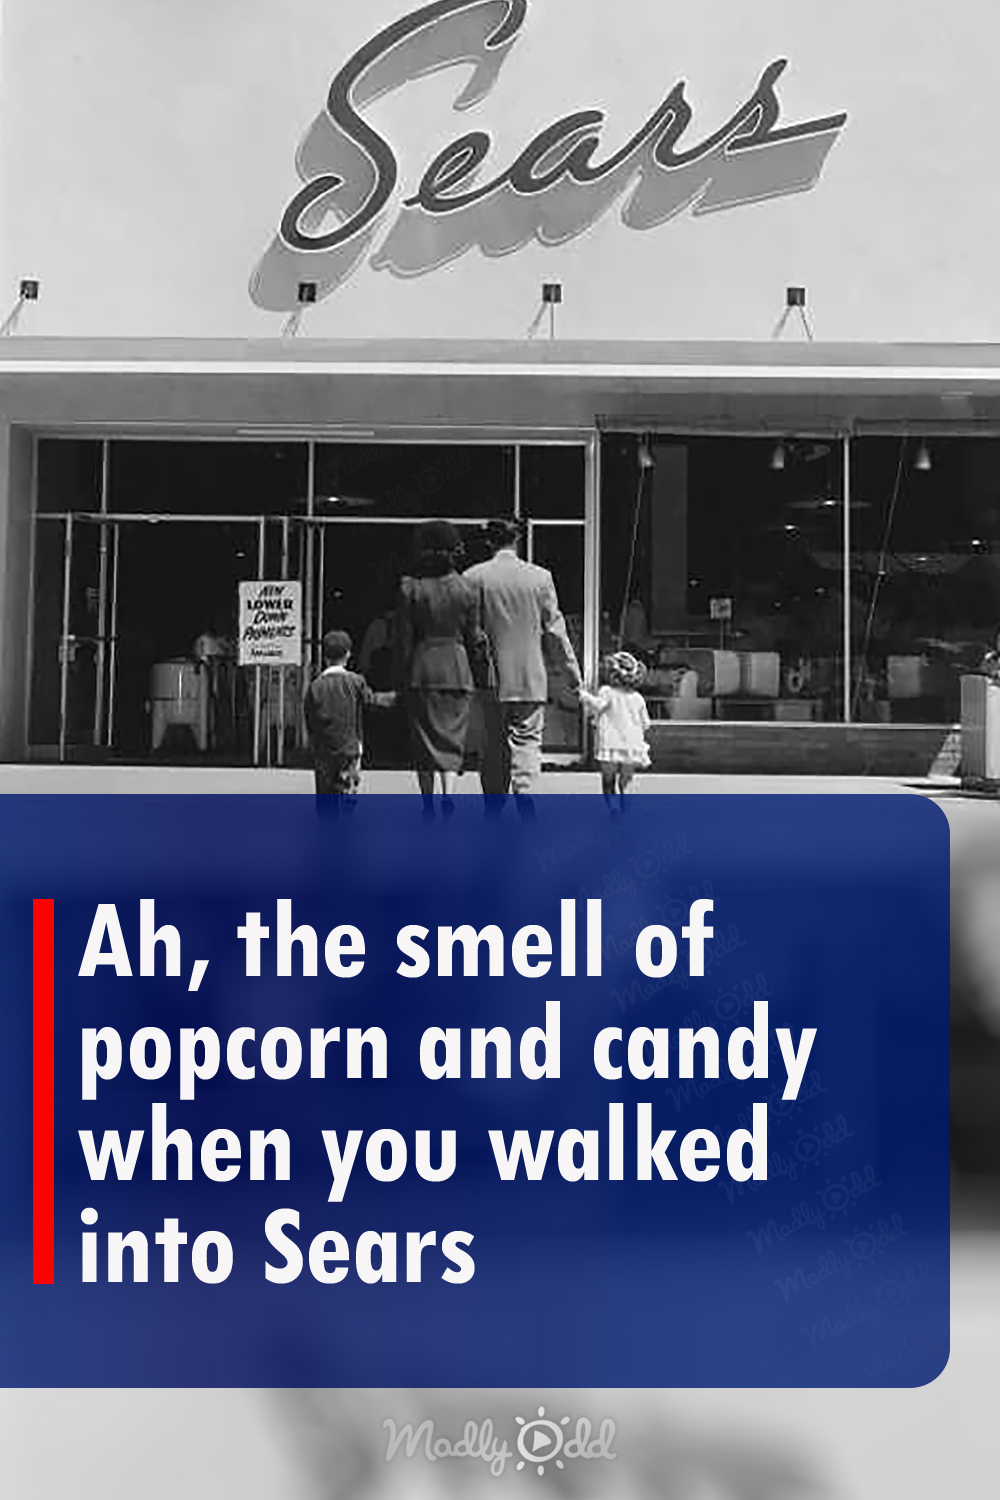 Ah, the smell of popcorn and candy when you walked into Sears